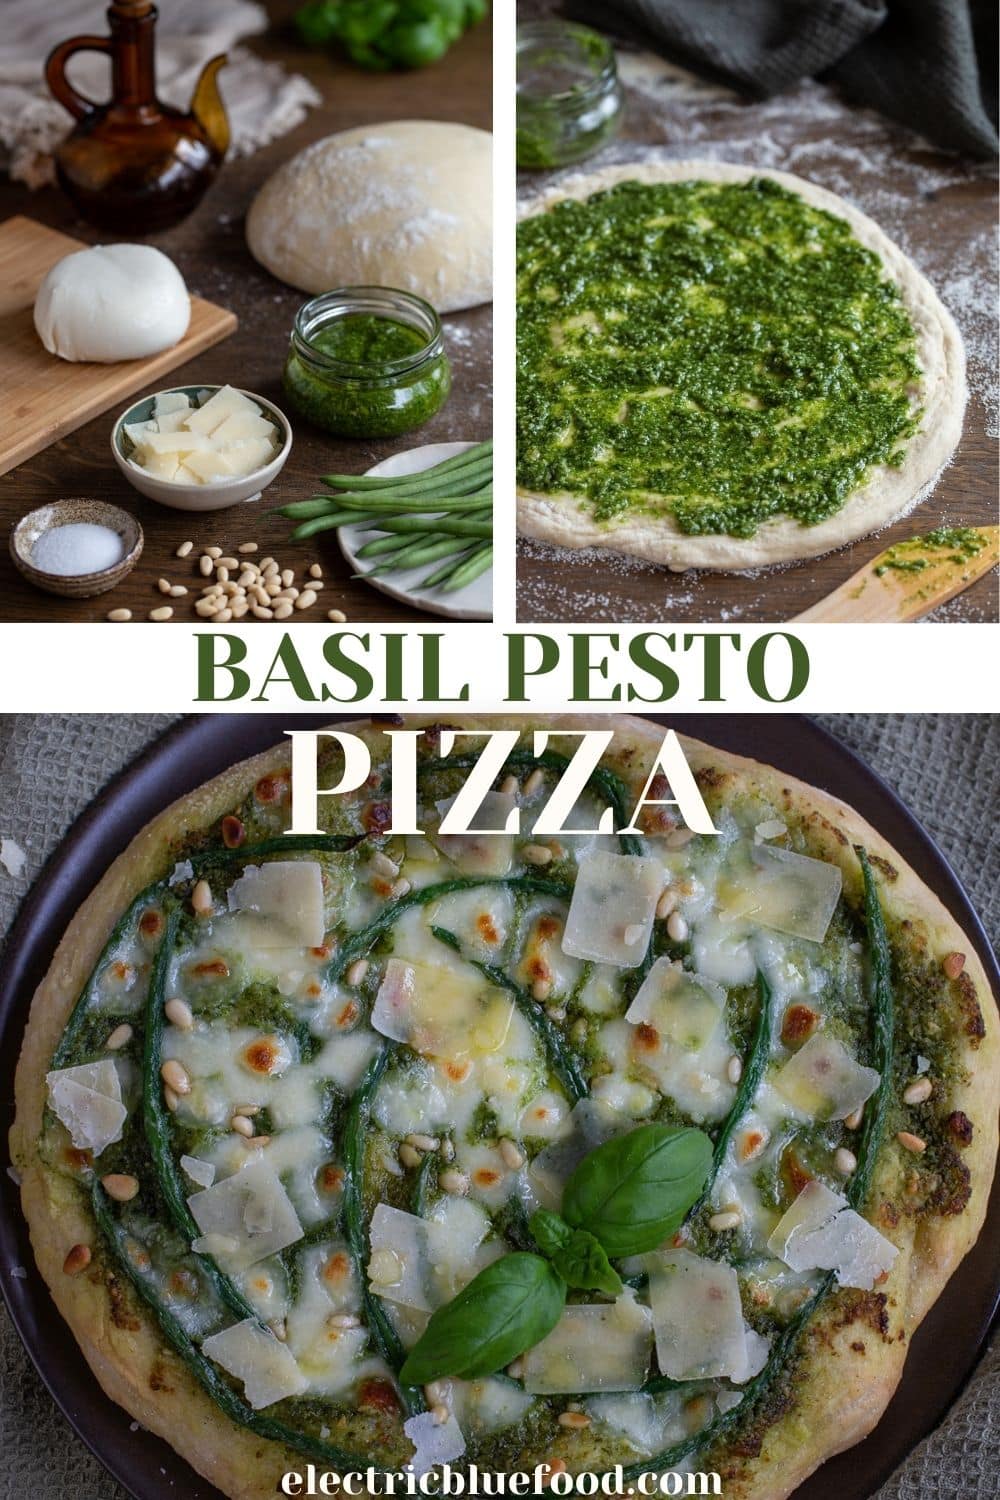 Pesto Pizza With Green Beans • Electric Blue Food